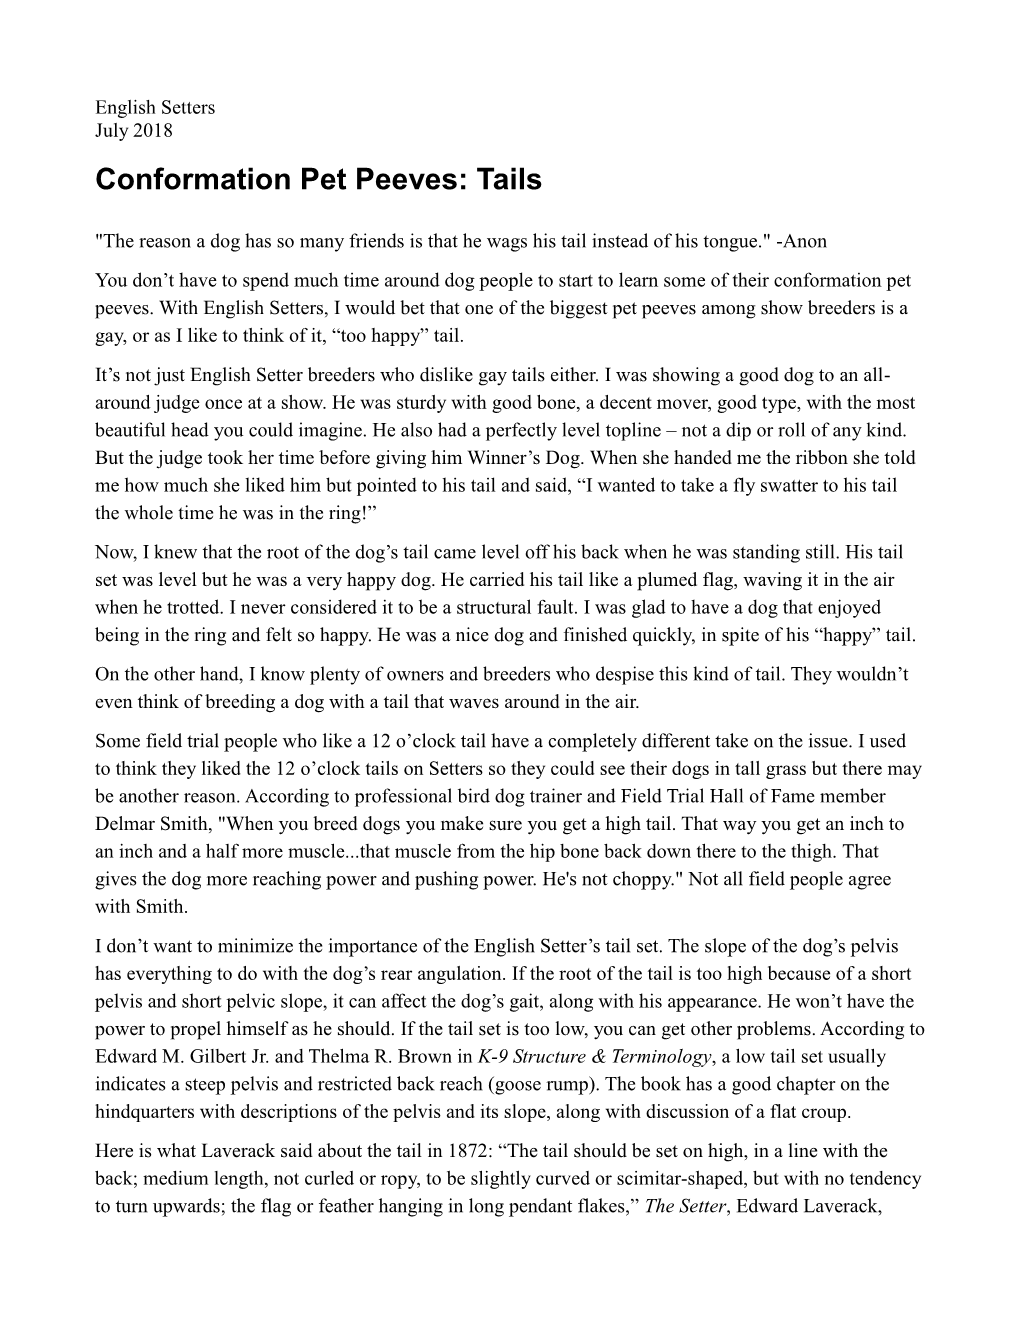 Conformation Pet Peeves: Tails